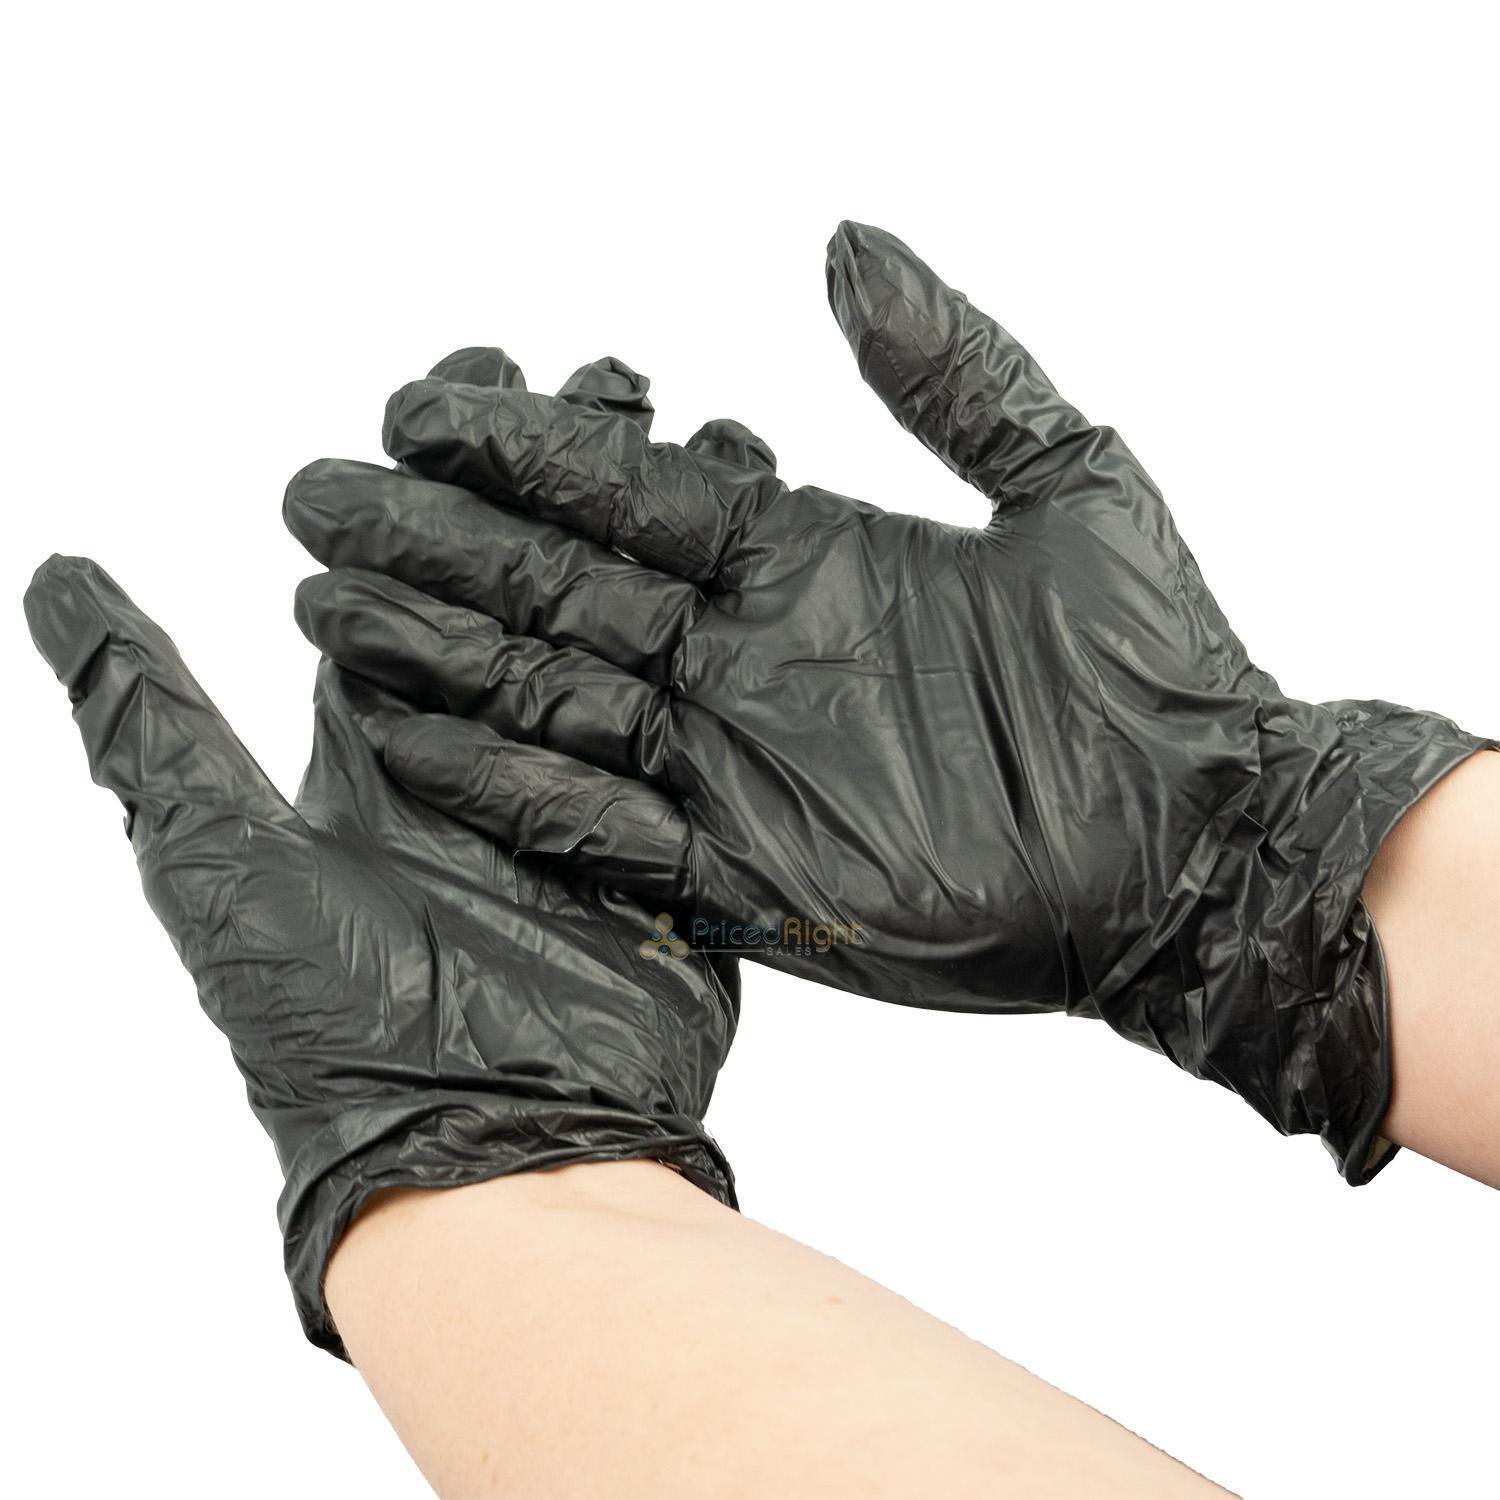 Black Nitrile Disposable Gloves Powder Latex Free Industrial X-Large 200 Count alternate image